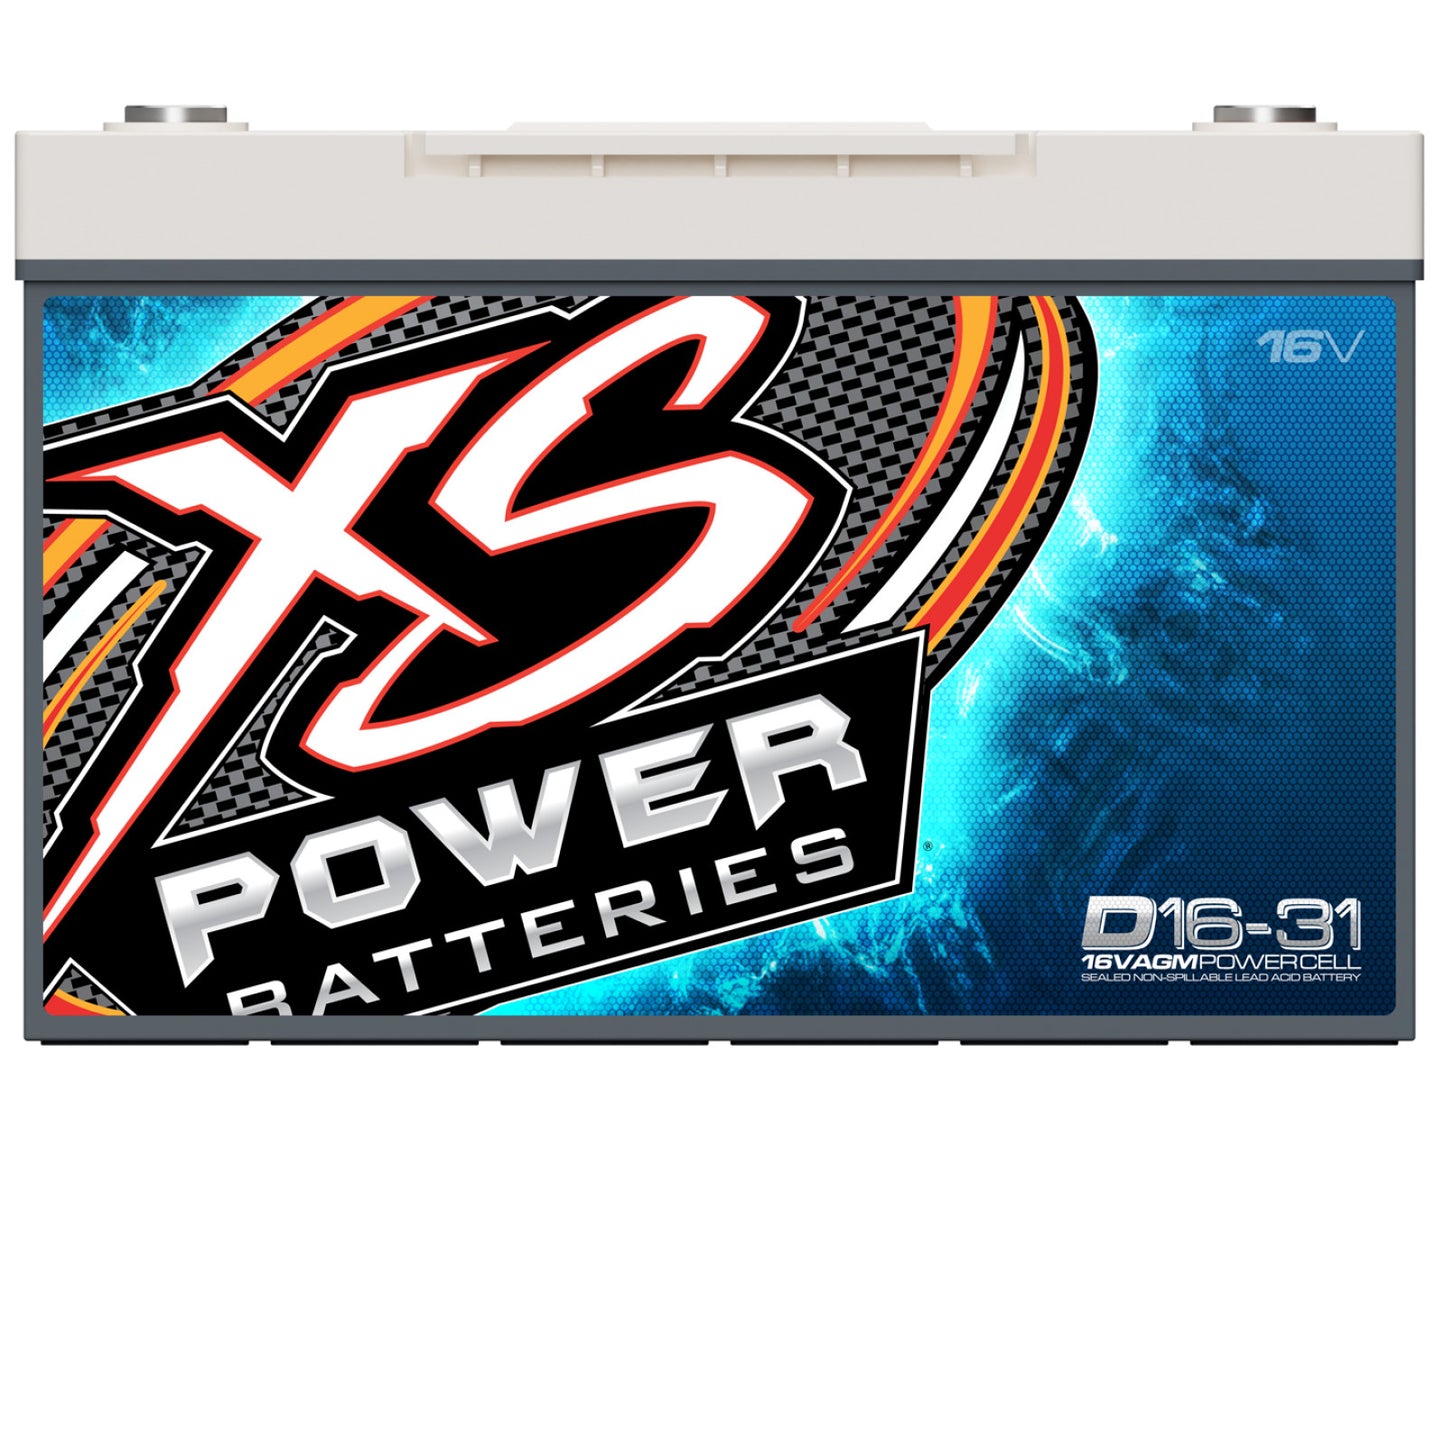 XS Power Batteries 16V AGM Batteries - 3/8" Stud Terminals Included 5000 Max Amps D16-31